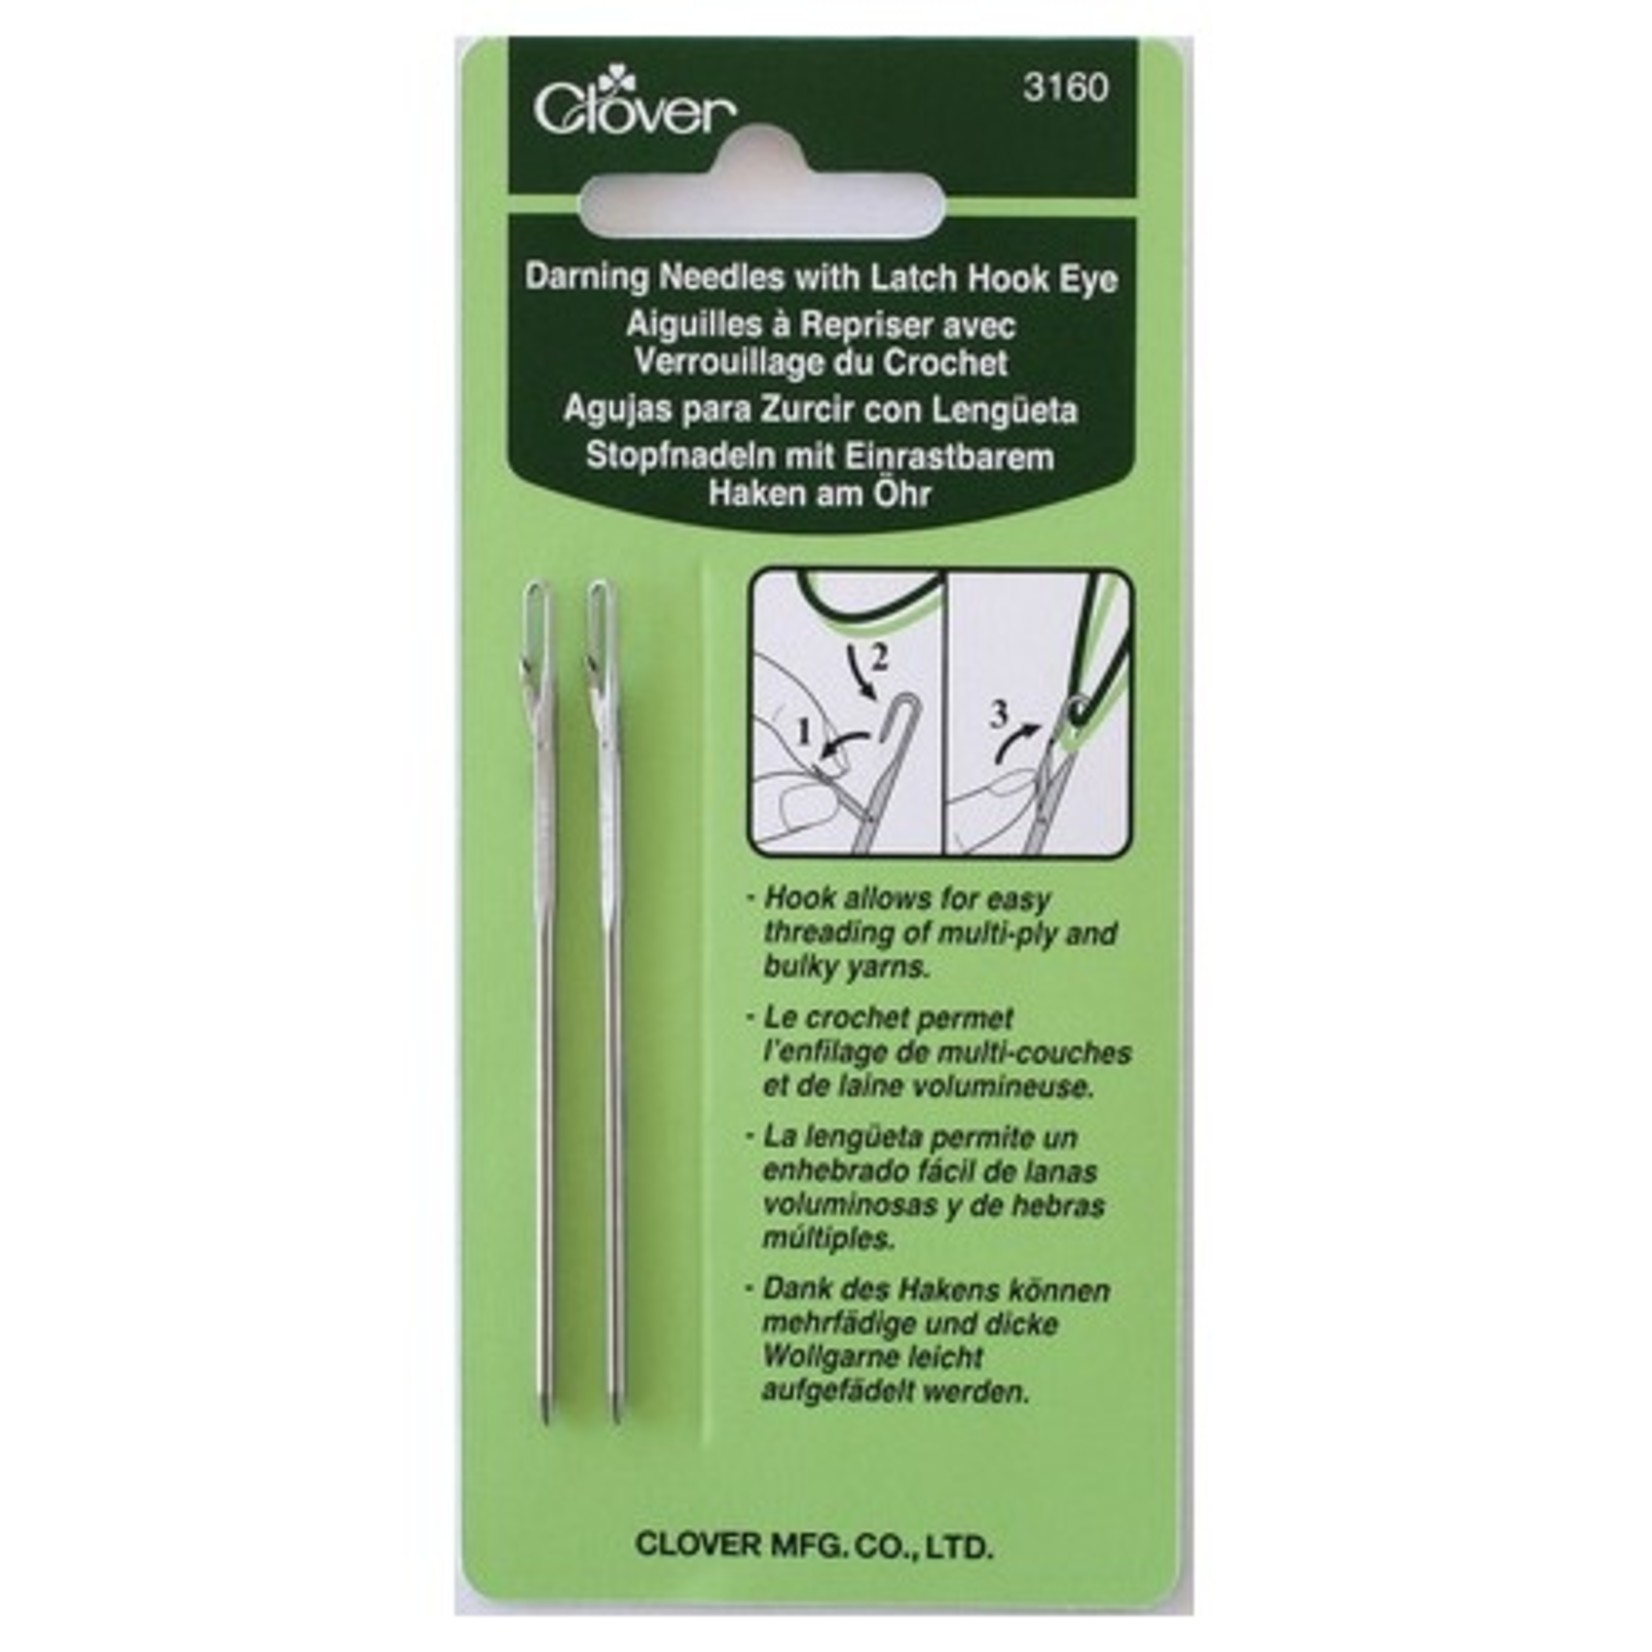 Clover Darning Needles With Latch Hook Eye (3160) by Clover